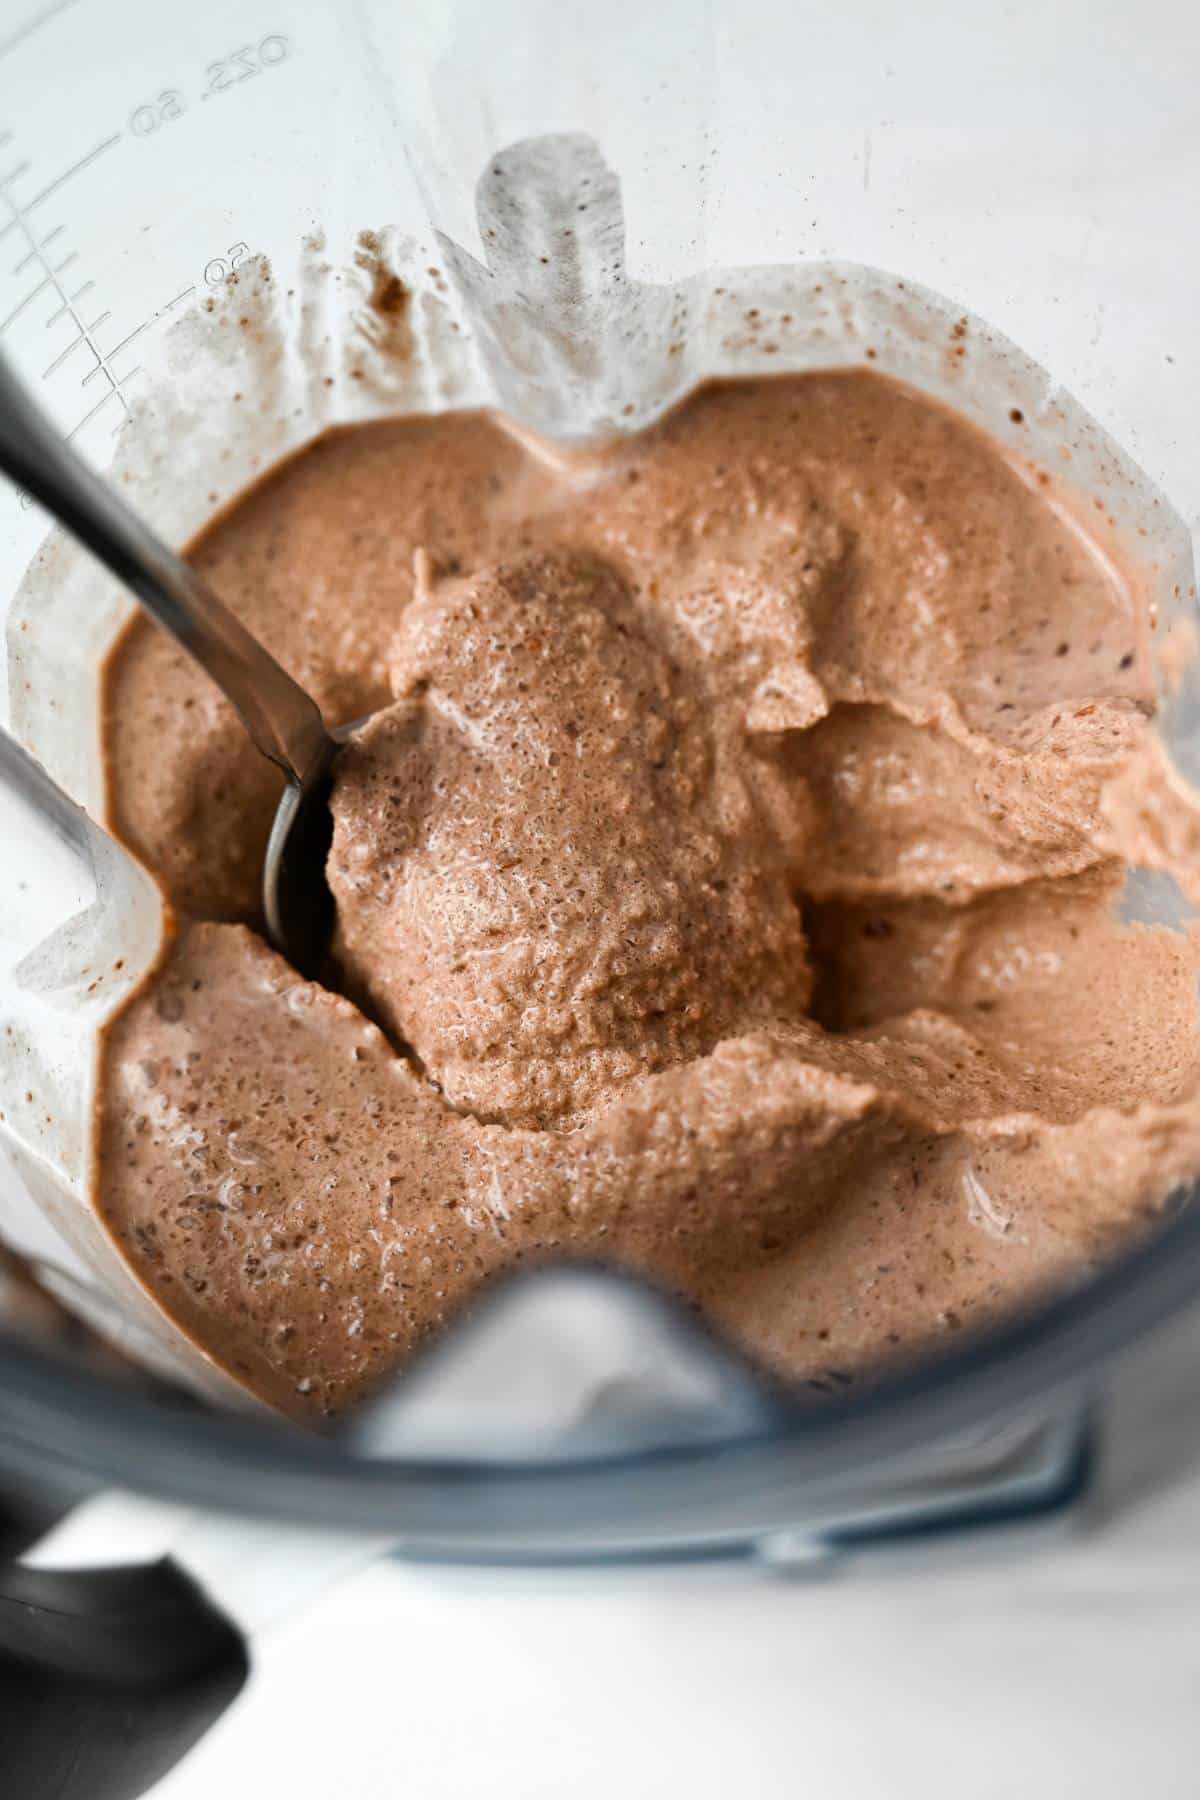 Did you know that your Vitamix can make ice cream? - Vitamix UK